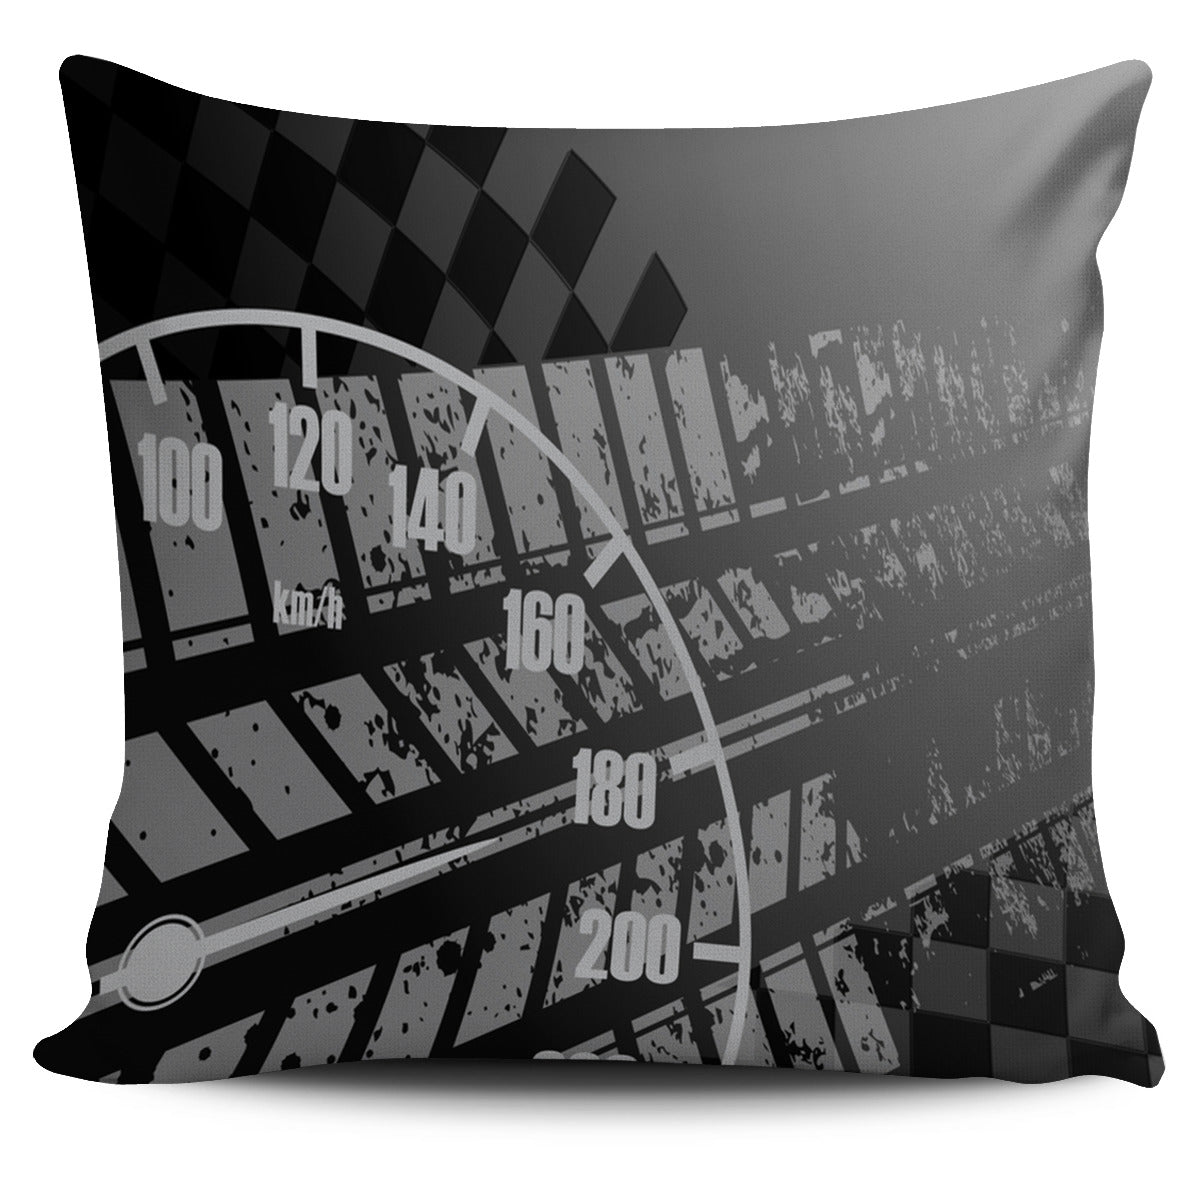 Racing Pillow Cover V8